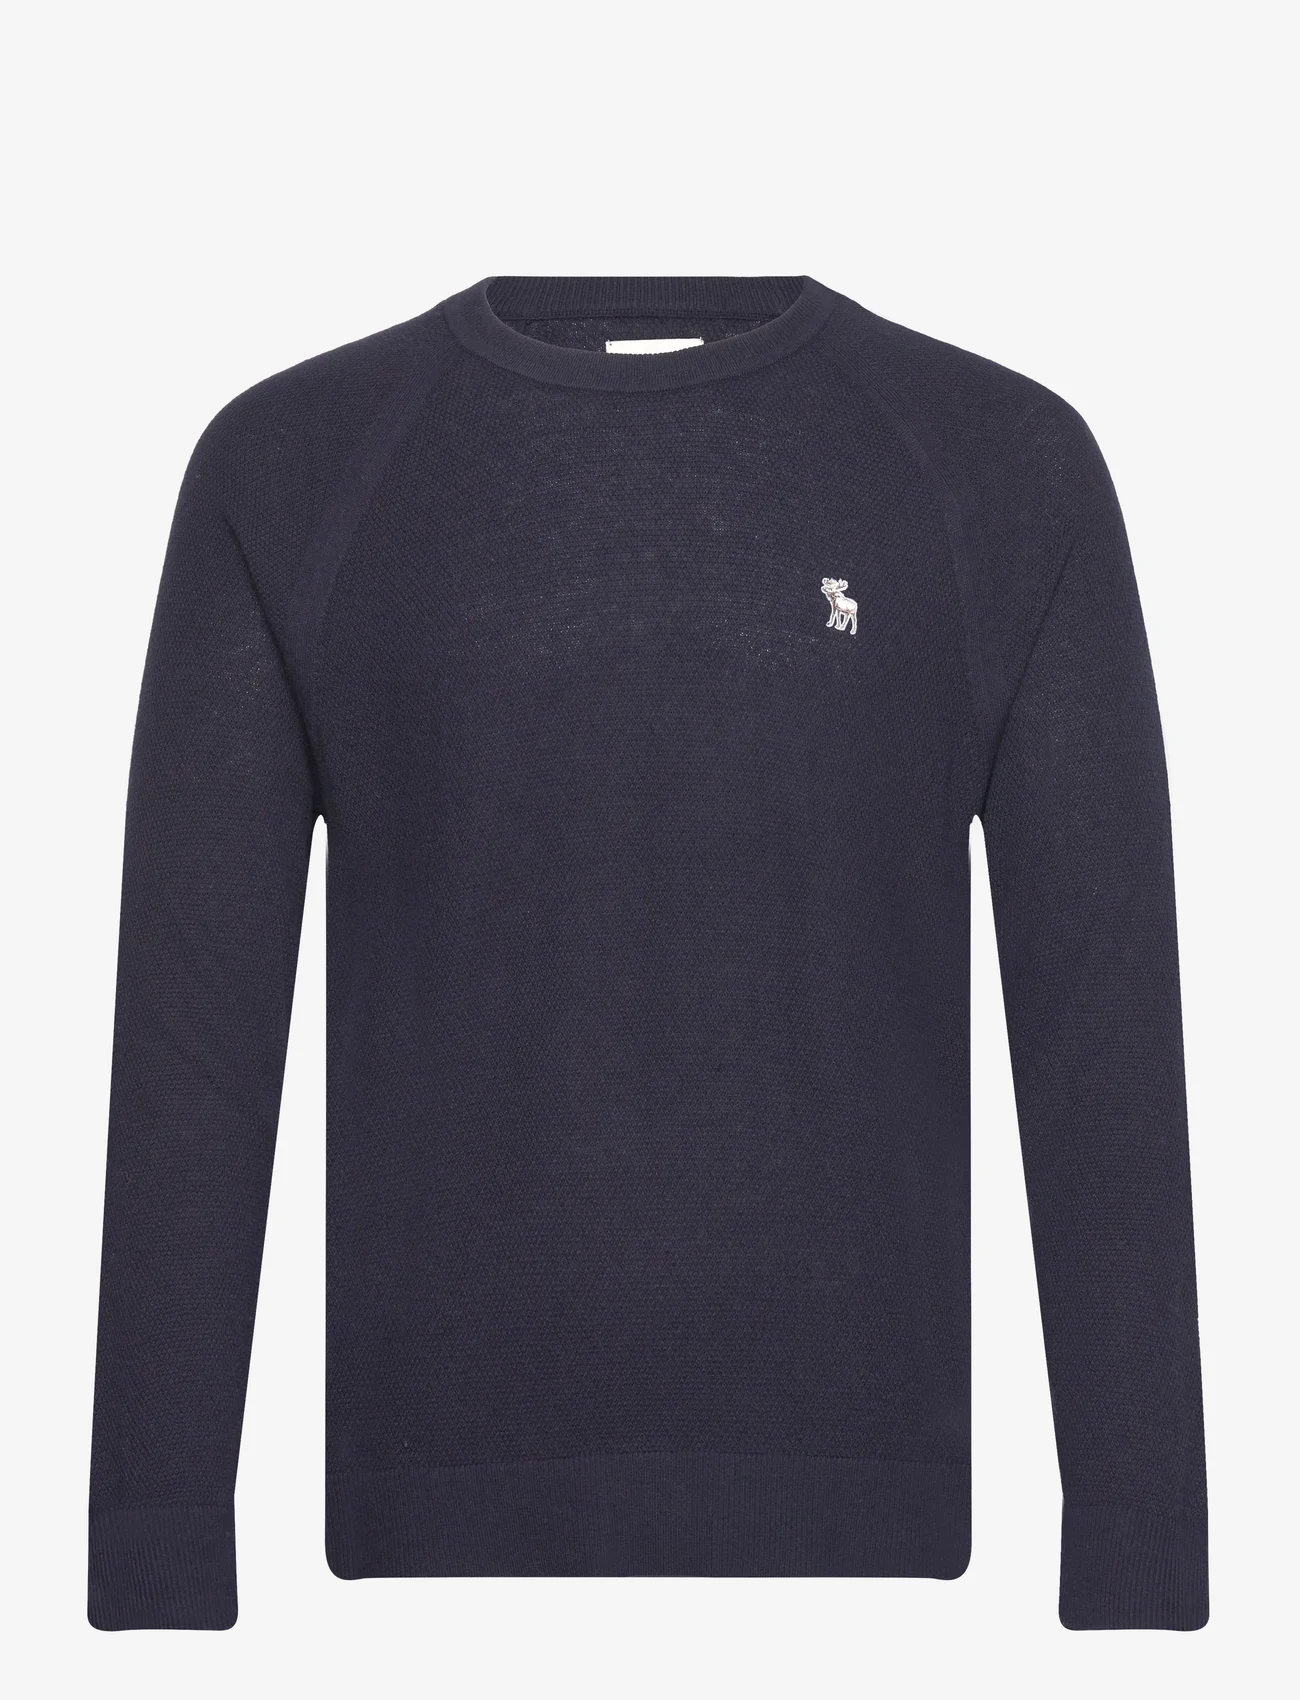 Abercrombie & Fitch - ANF MENS SWEATERS - rundhalsad - neat navy - 0